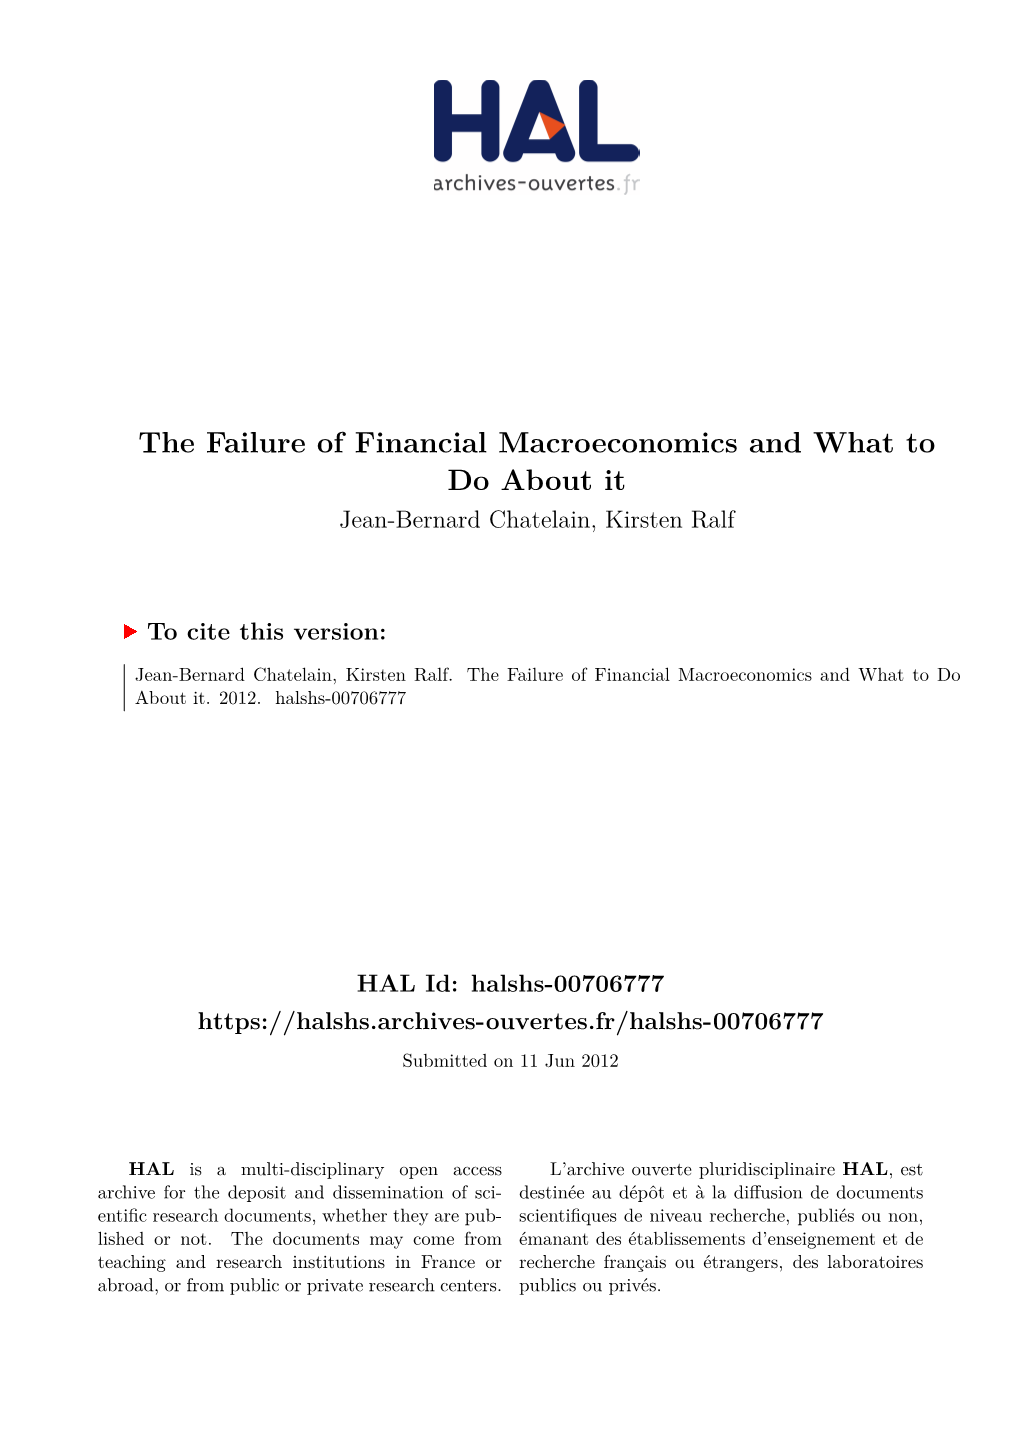 The Failure of Financial Macroeconomics and What to Do About It Jean-Bernard Chatelain, Kirsten Ralf